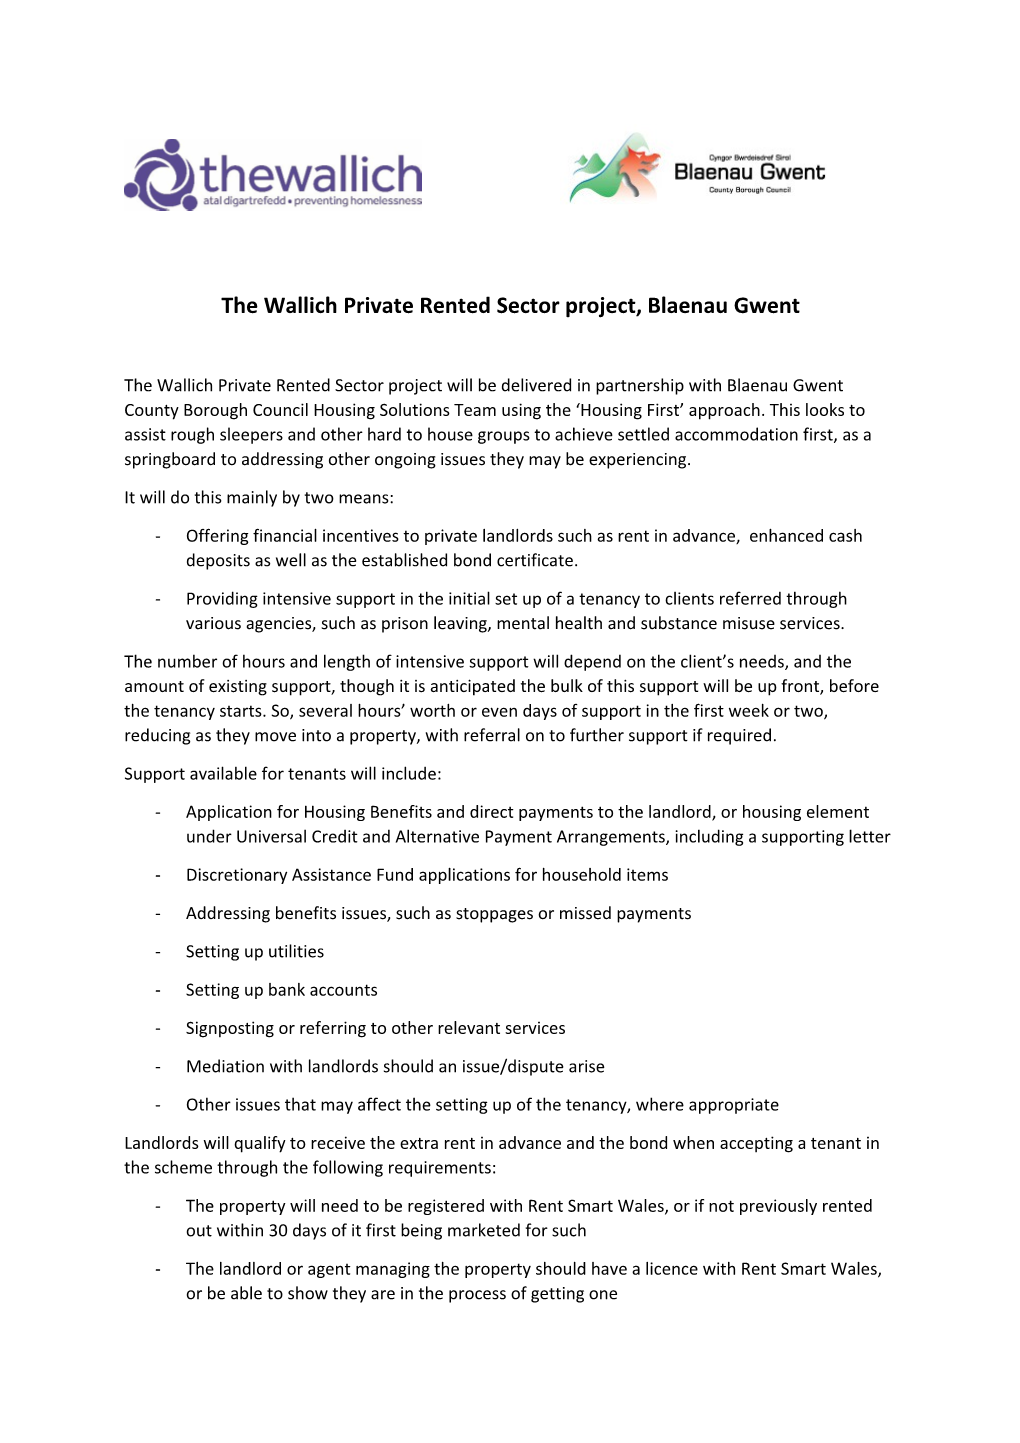 The Wallich Private Rented Sector Project, Blaenau Gwent